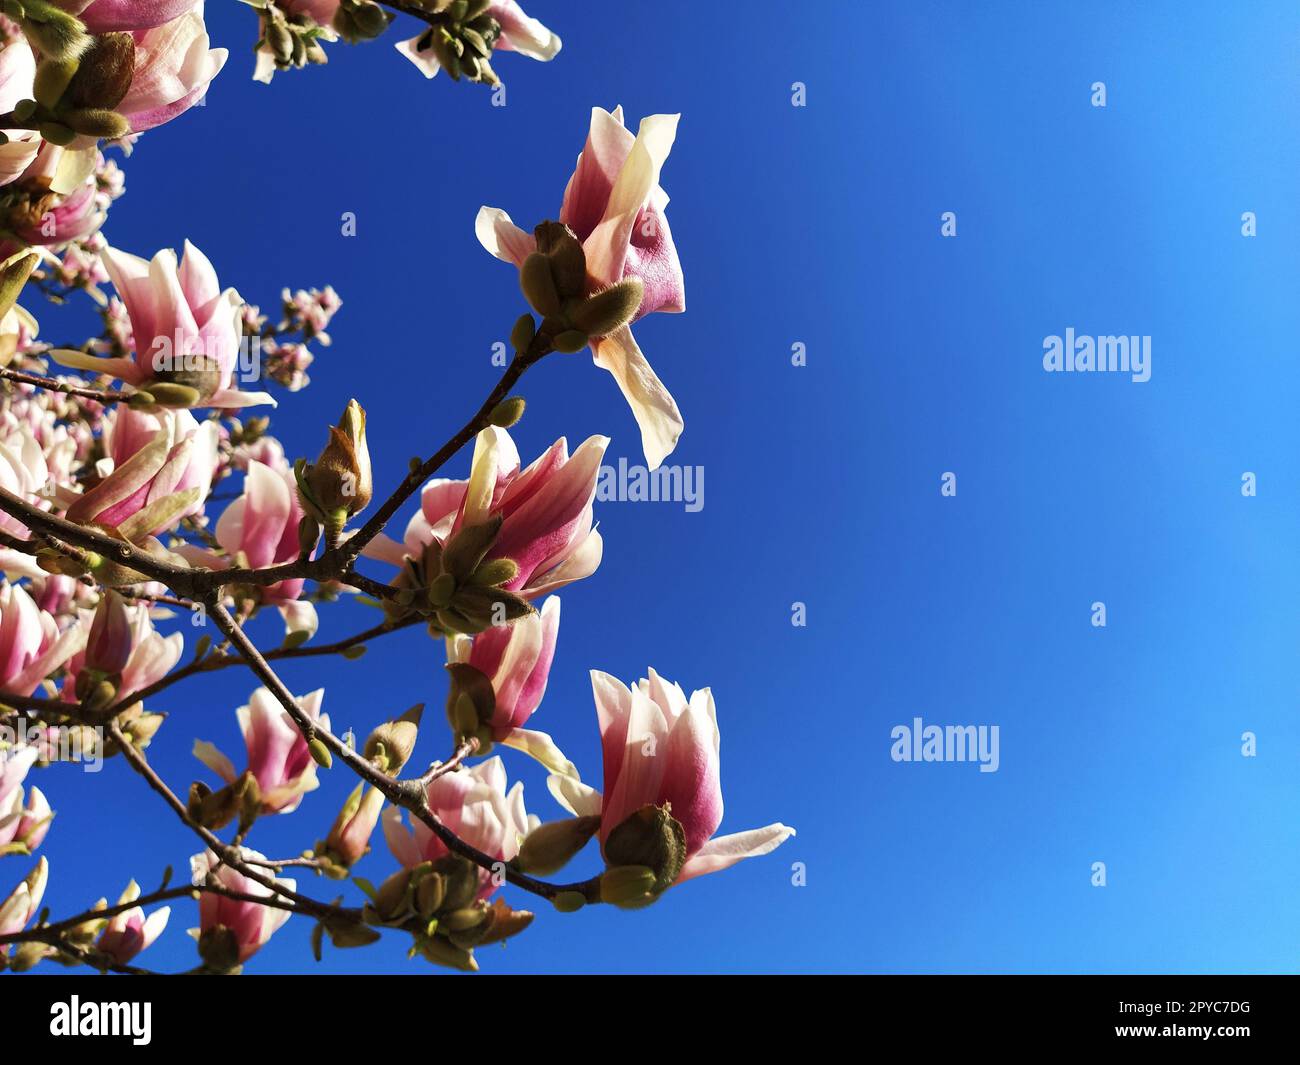 Beautiful blossoming pink flowers and magnolia buds on branches without leaves. Blue sky and sunlight. Wedding invitation or greeting card from March 8. The beginning of spring. Delicate white petals. Stock Photo